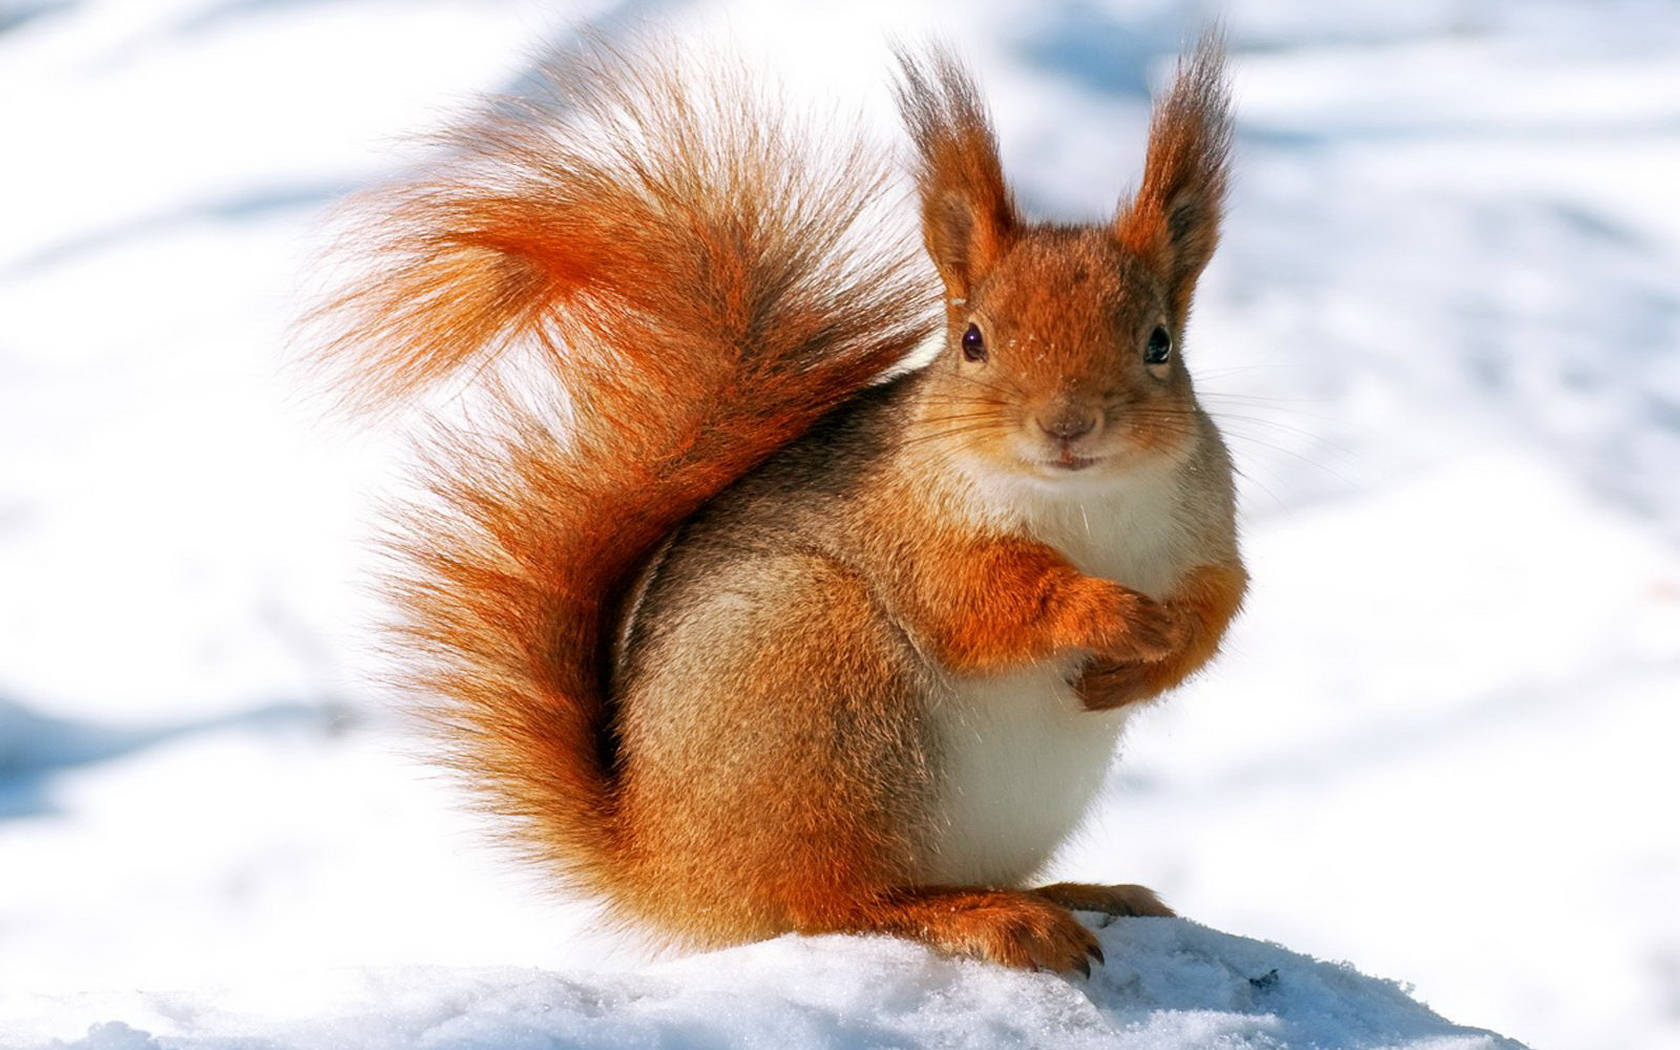 Squirrel Standing On Snow Wallpaper